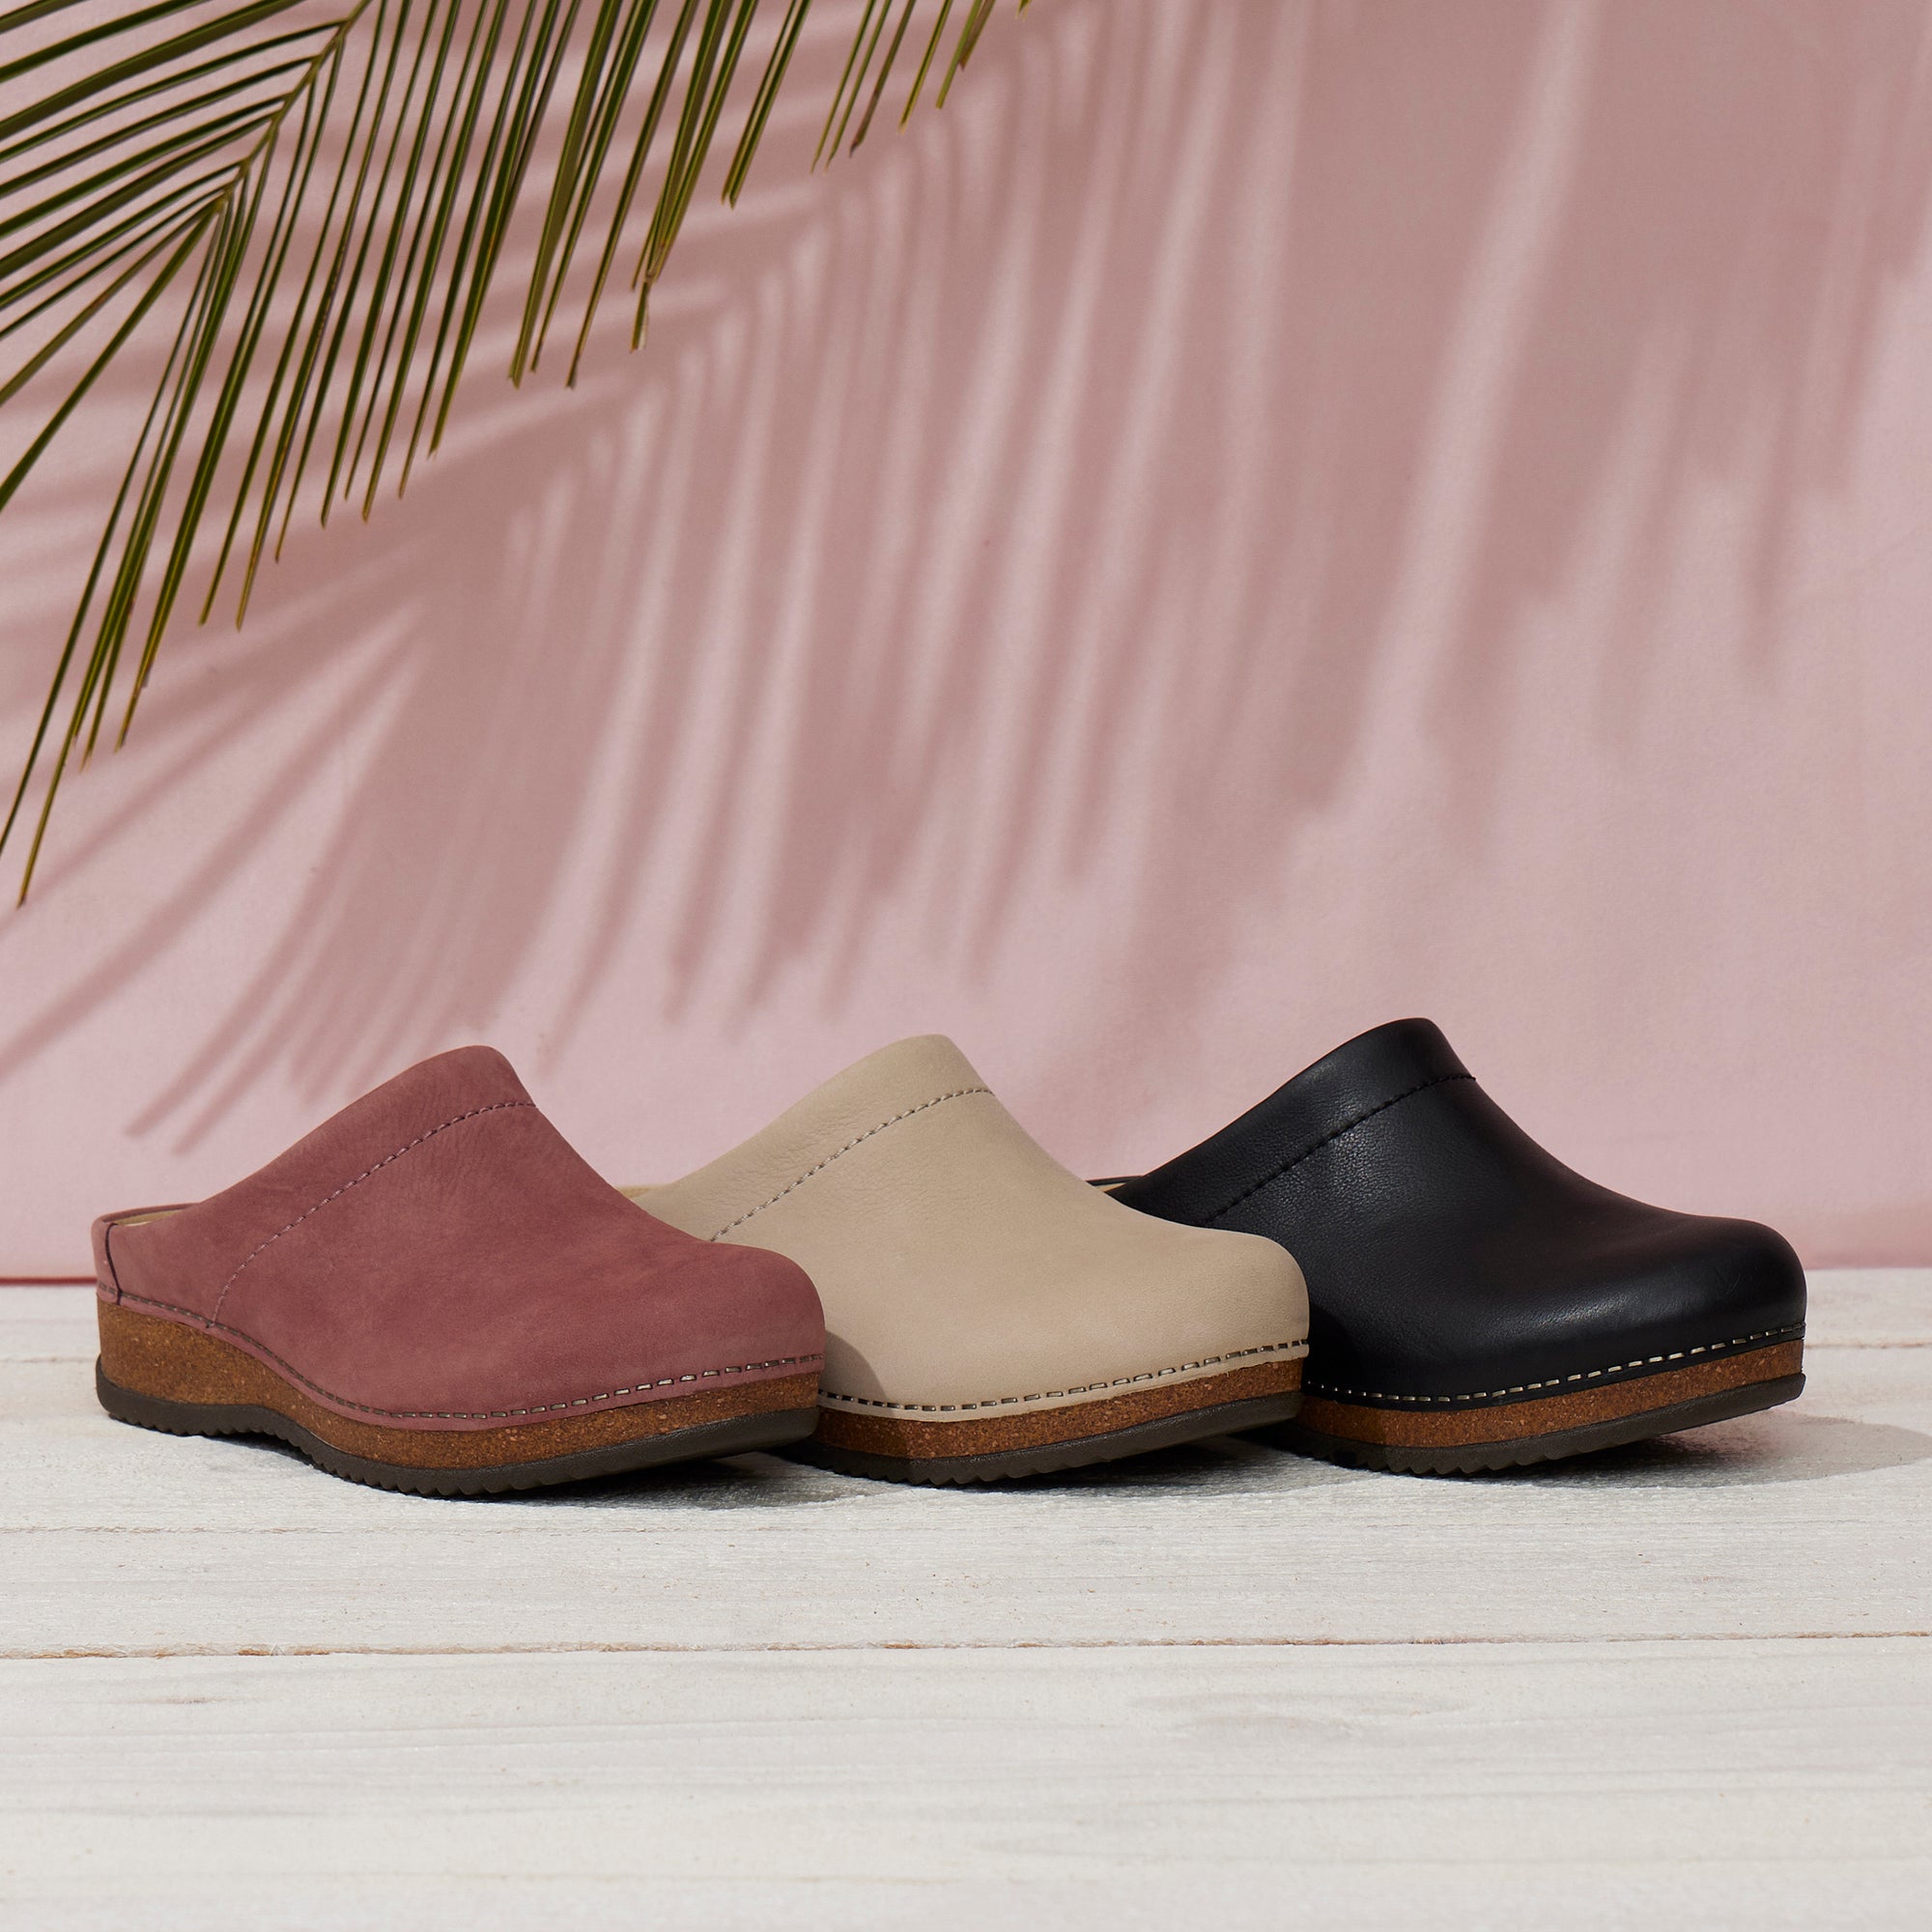 Three colors of a comfortable backless mule clog.